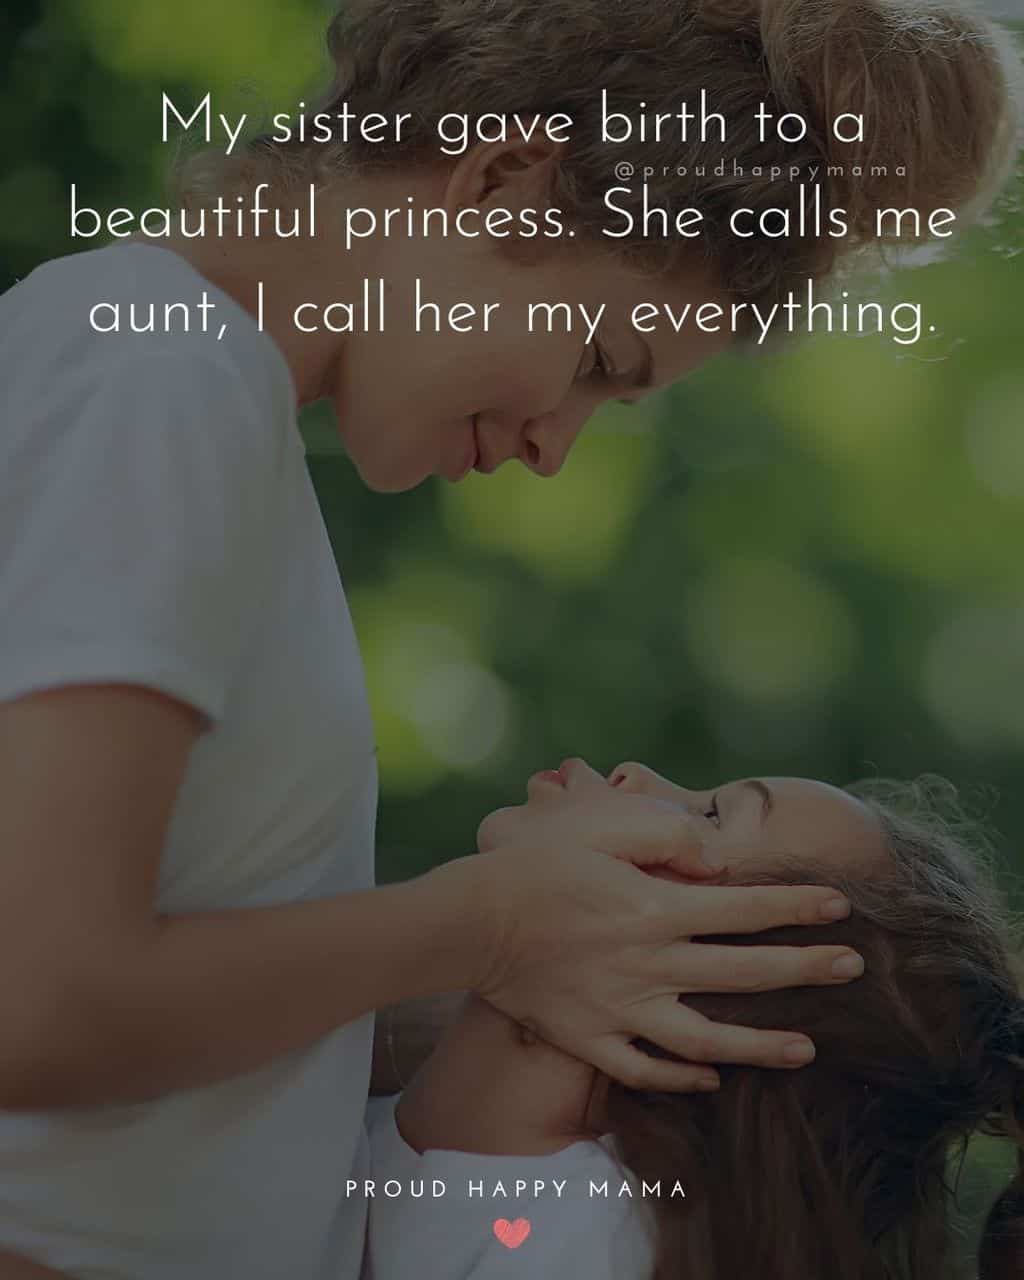 Niece Quotes - My sister gave birth to a beautiful princess. She calls me aunt, I call her my everything.